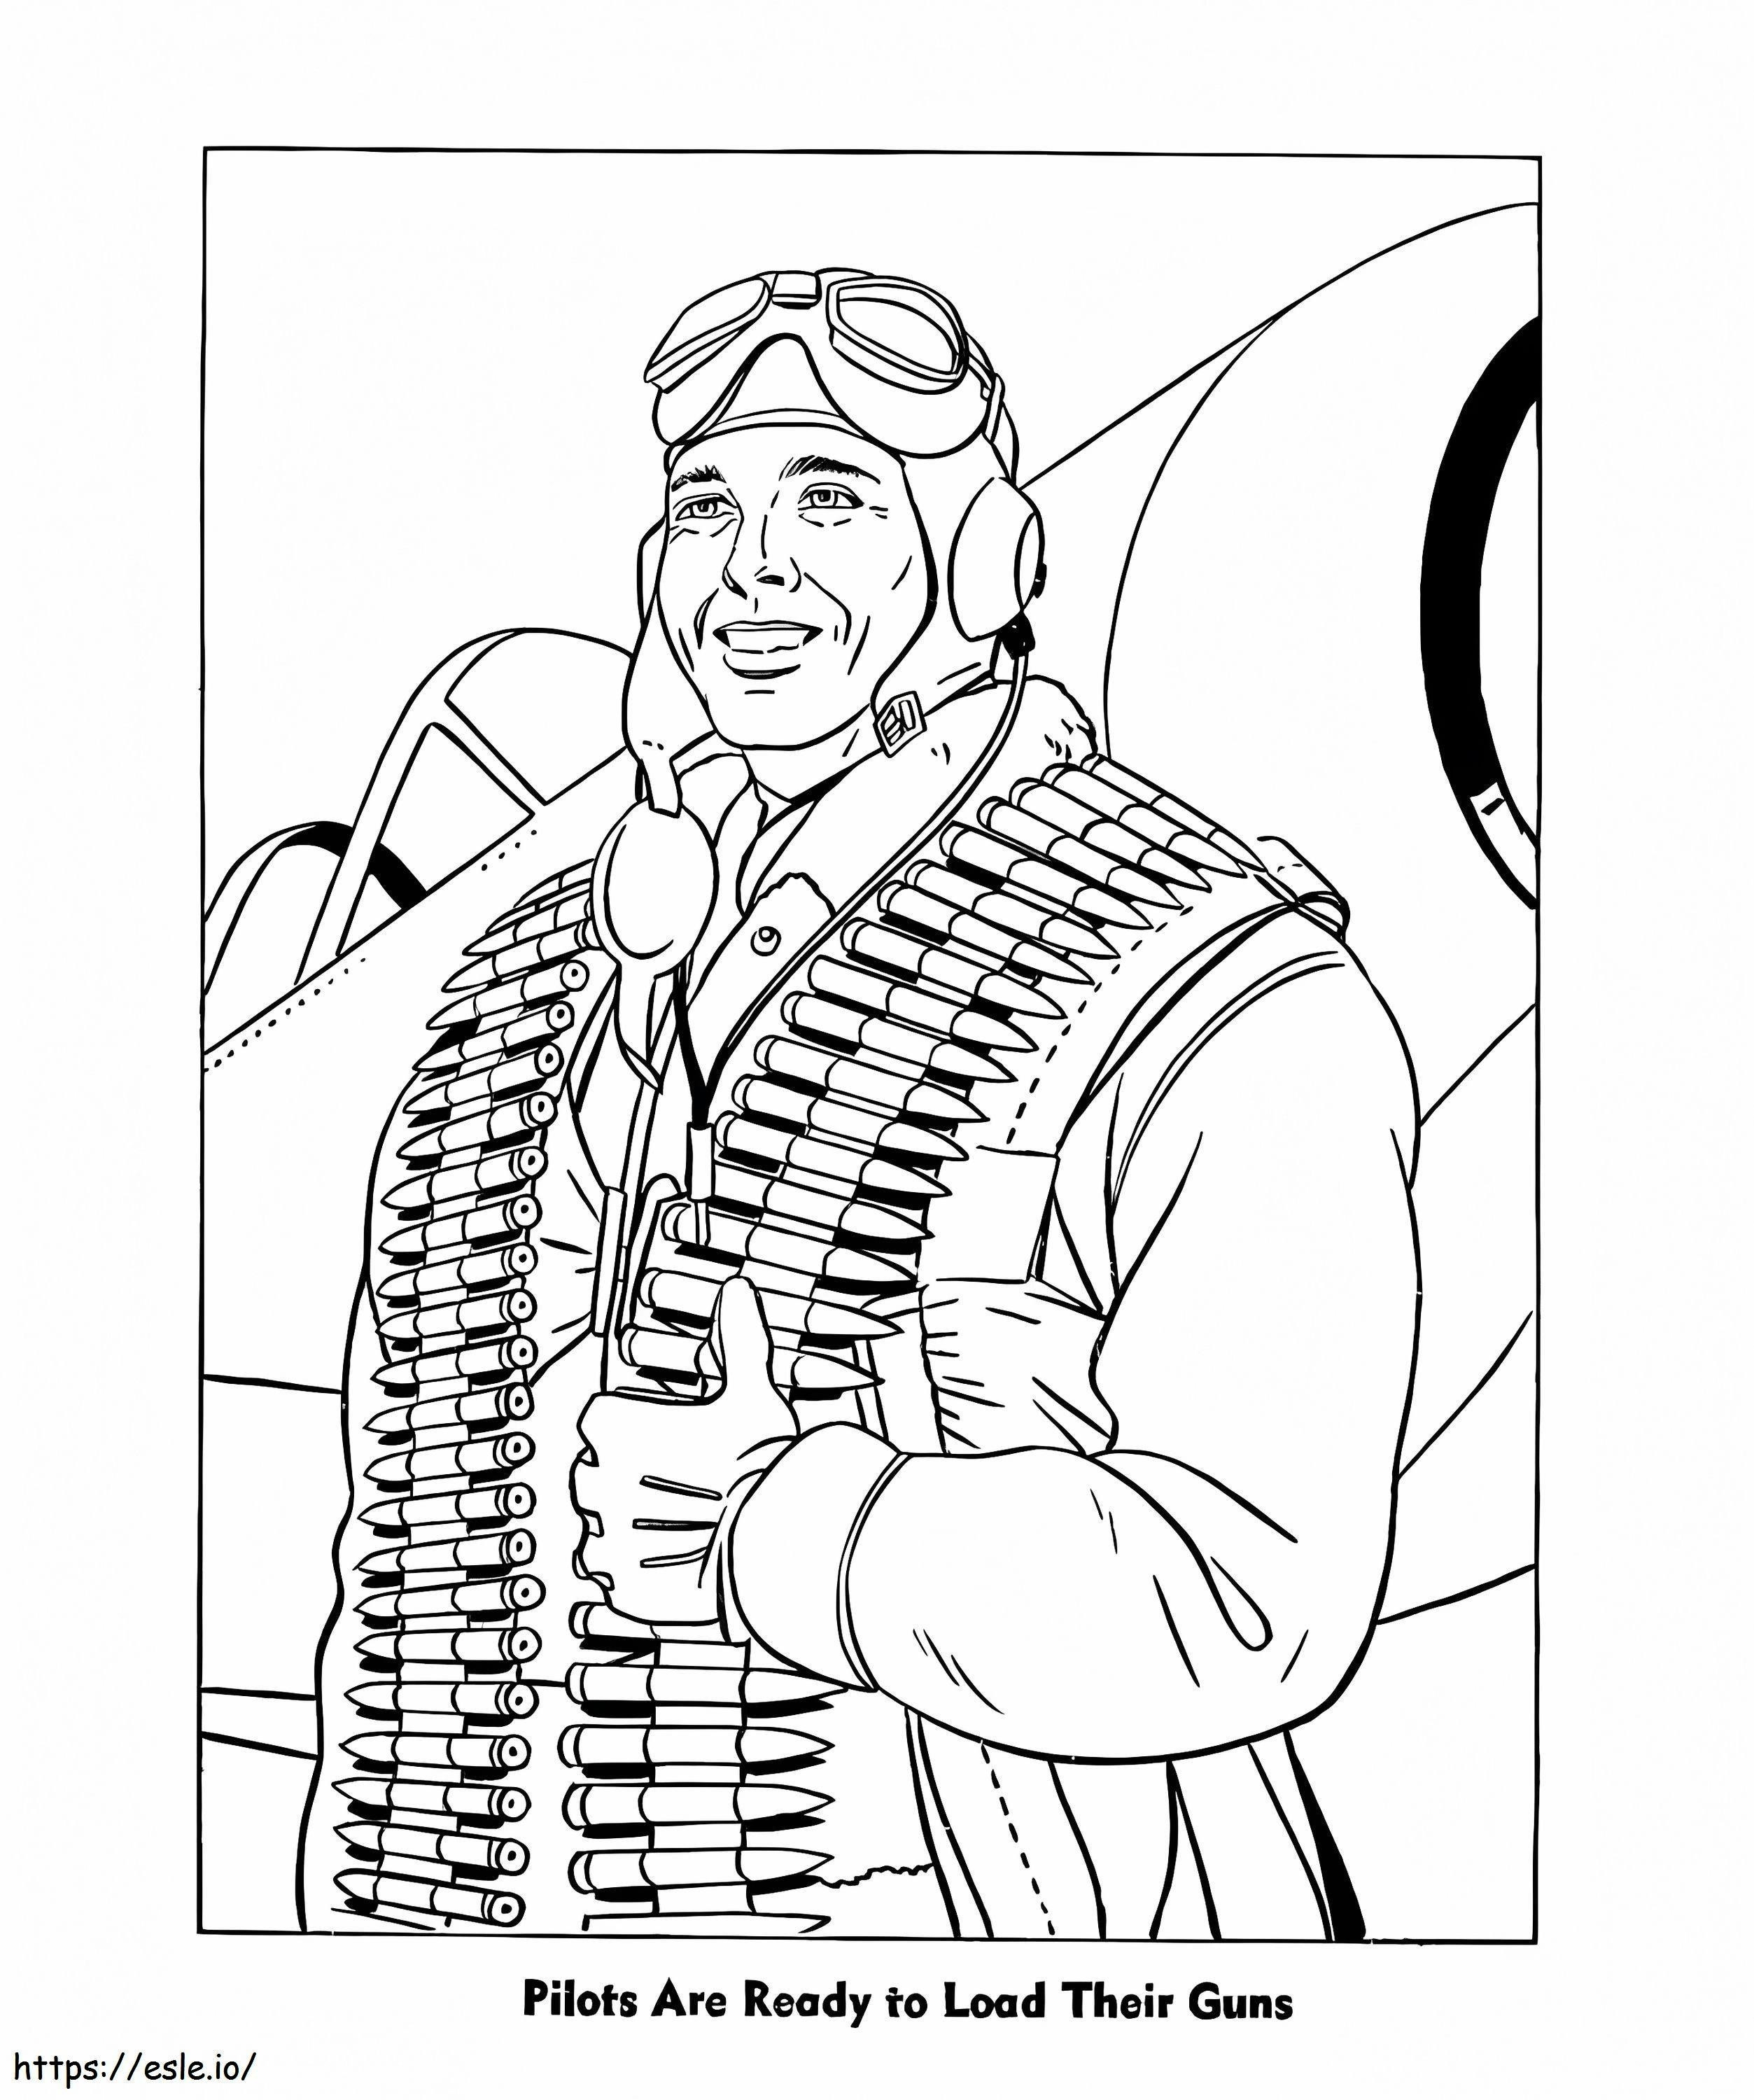 Army Pilot coloring page